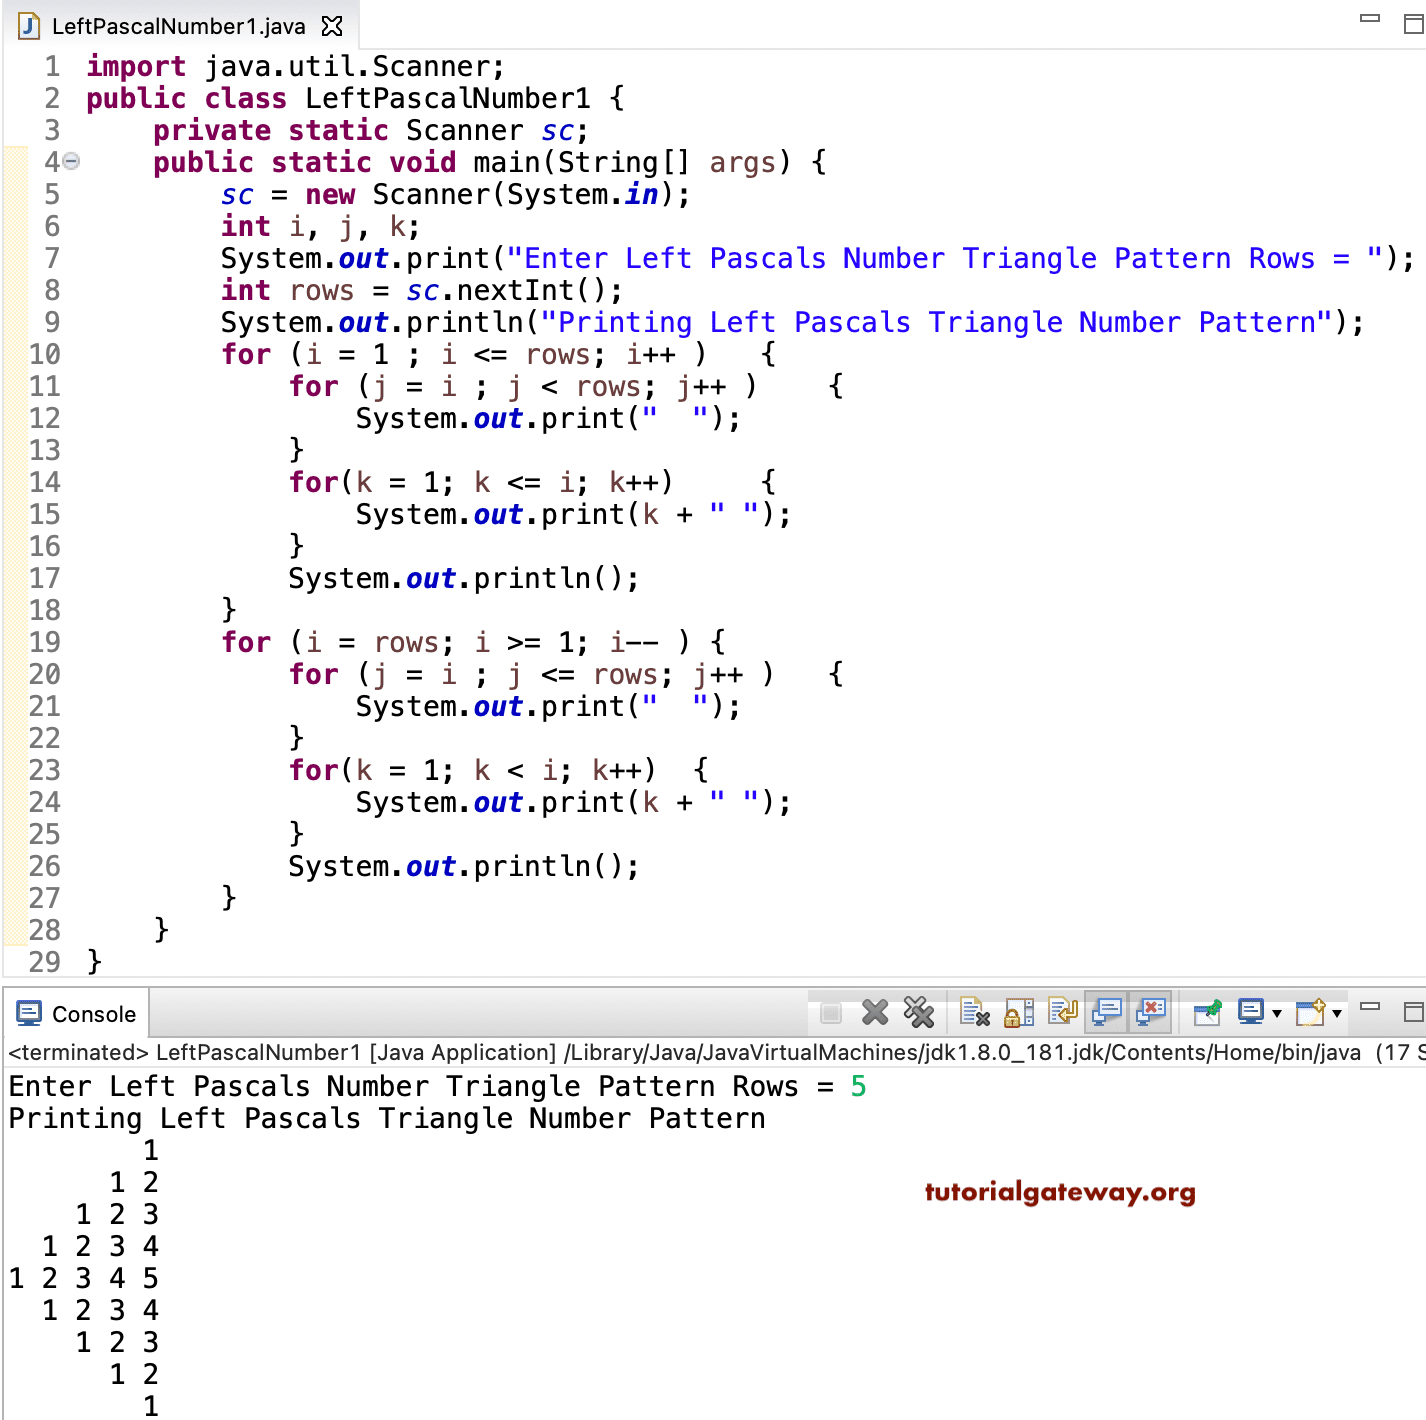 Java Program to Print Left Pascals Number Triangle